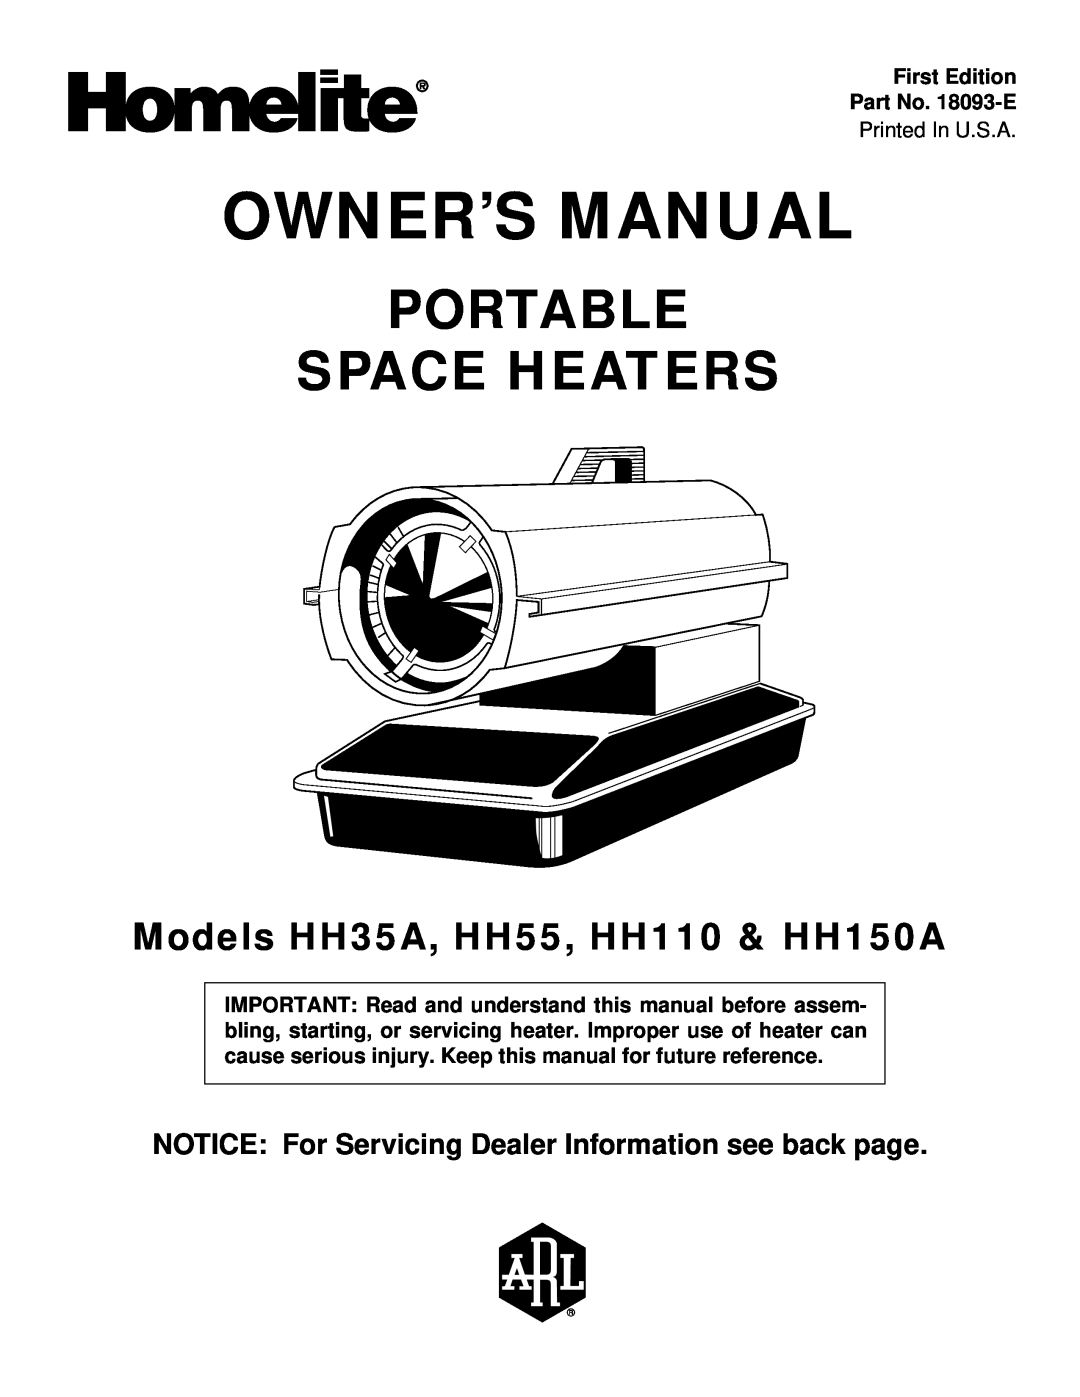 Homelite owner manual First Edition Part No. 18093-E, Portable Space Heaters, Models HH35A, HH55, HH110 & HH150A 